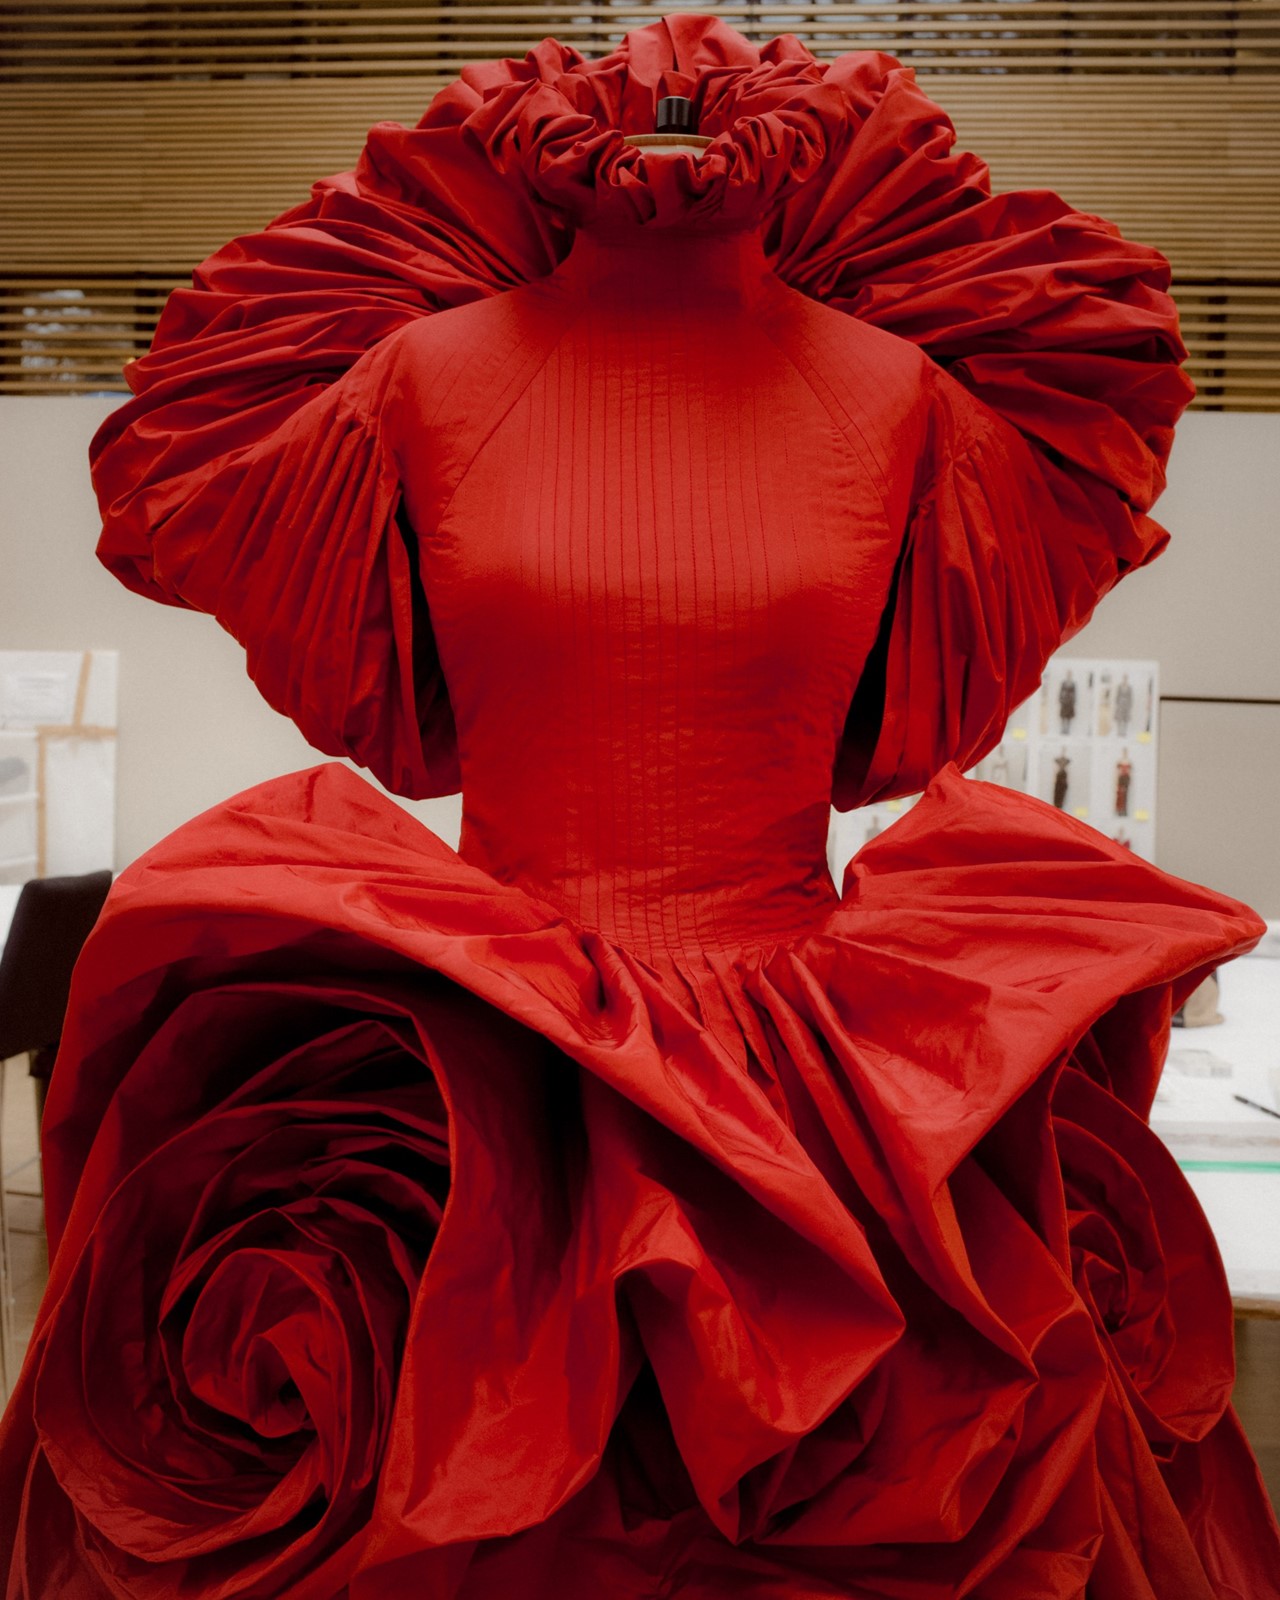 Roses - An exhibition by Alexander McQueen - Twin Magazine Twin Magazine